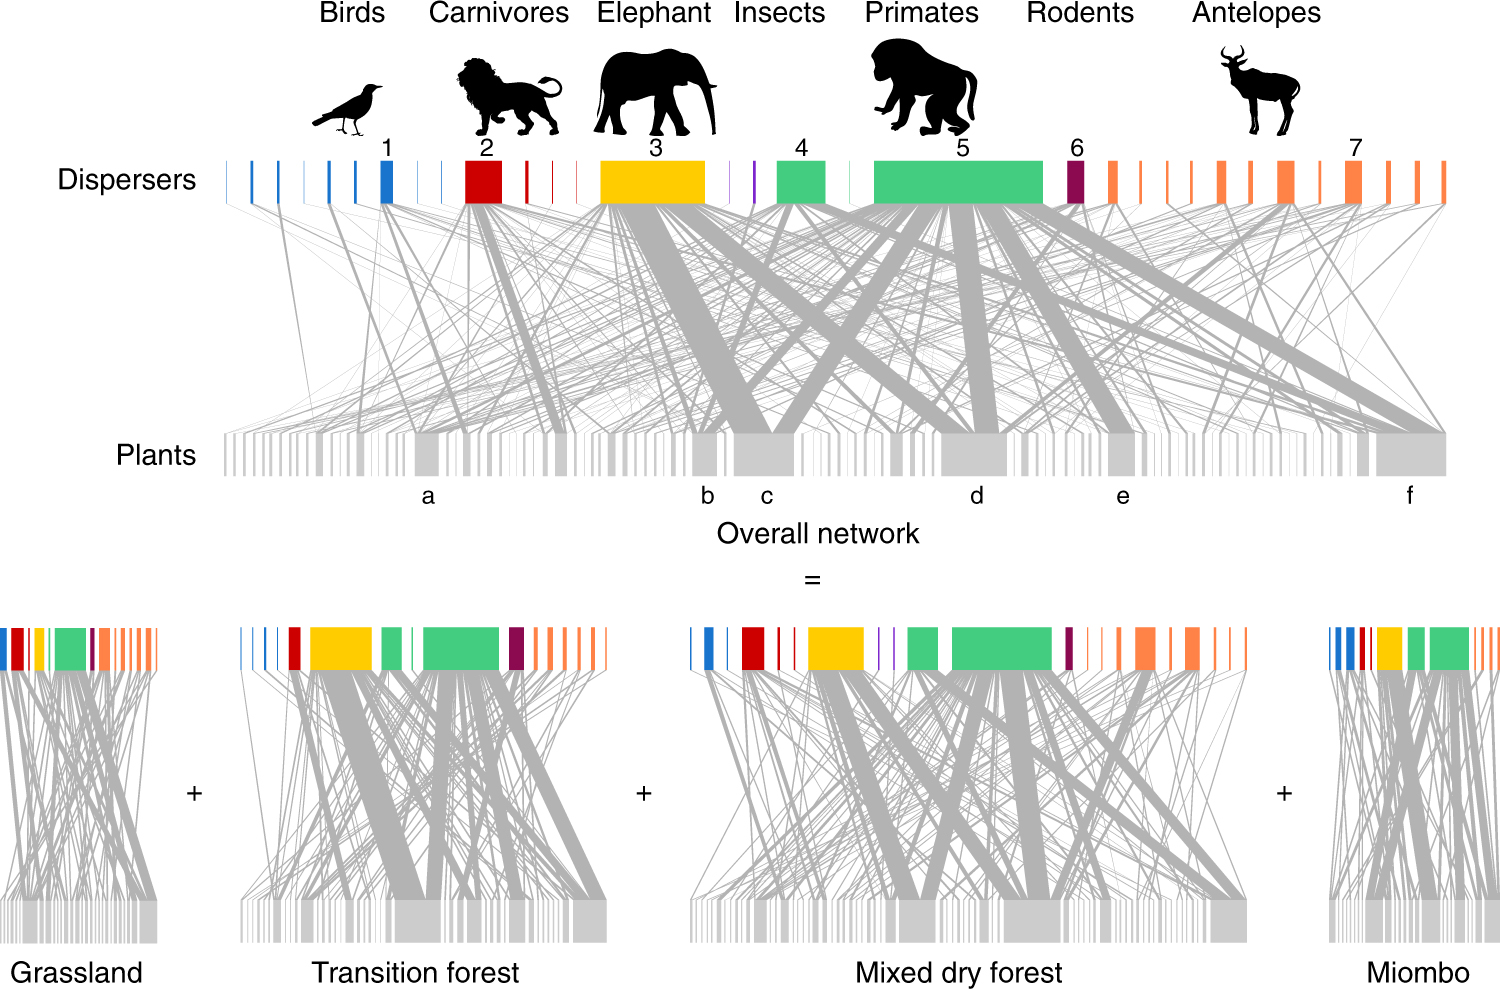 Multilayer Networks Reveal The Spatial Structure Of Seed Dispersal Interactions Across The Great Rift Landscapes Nature Communications